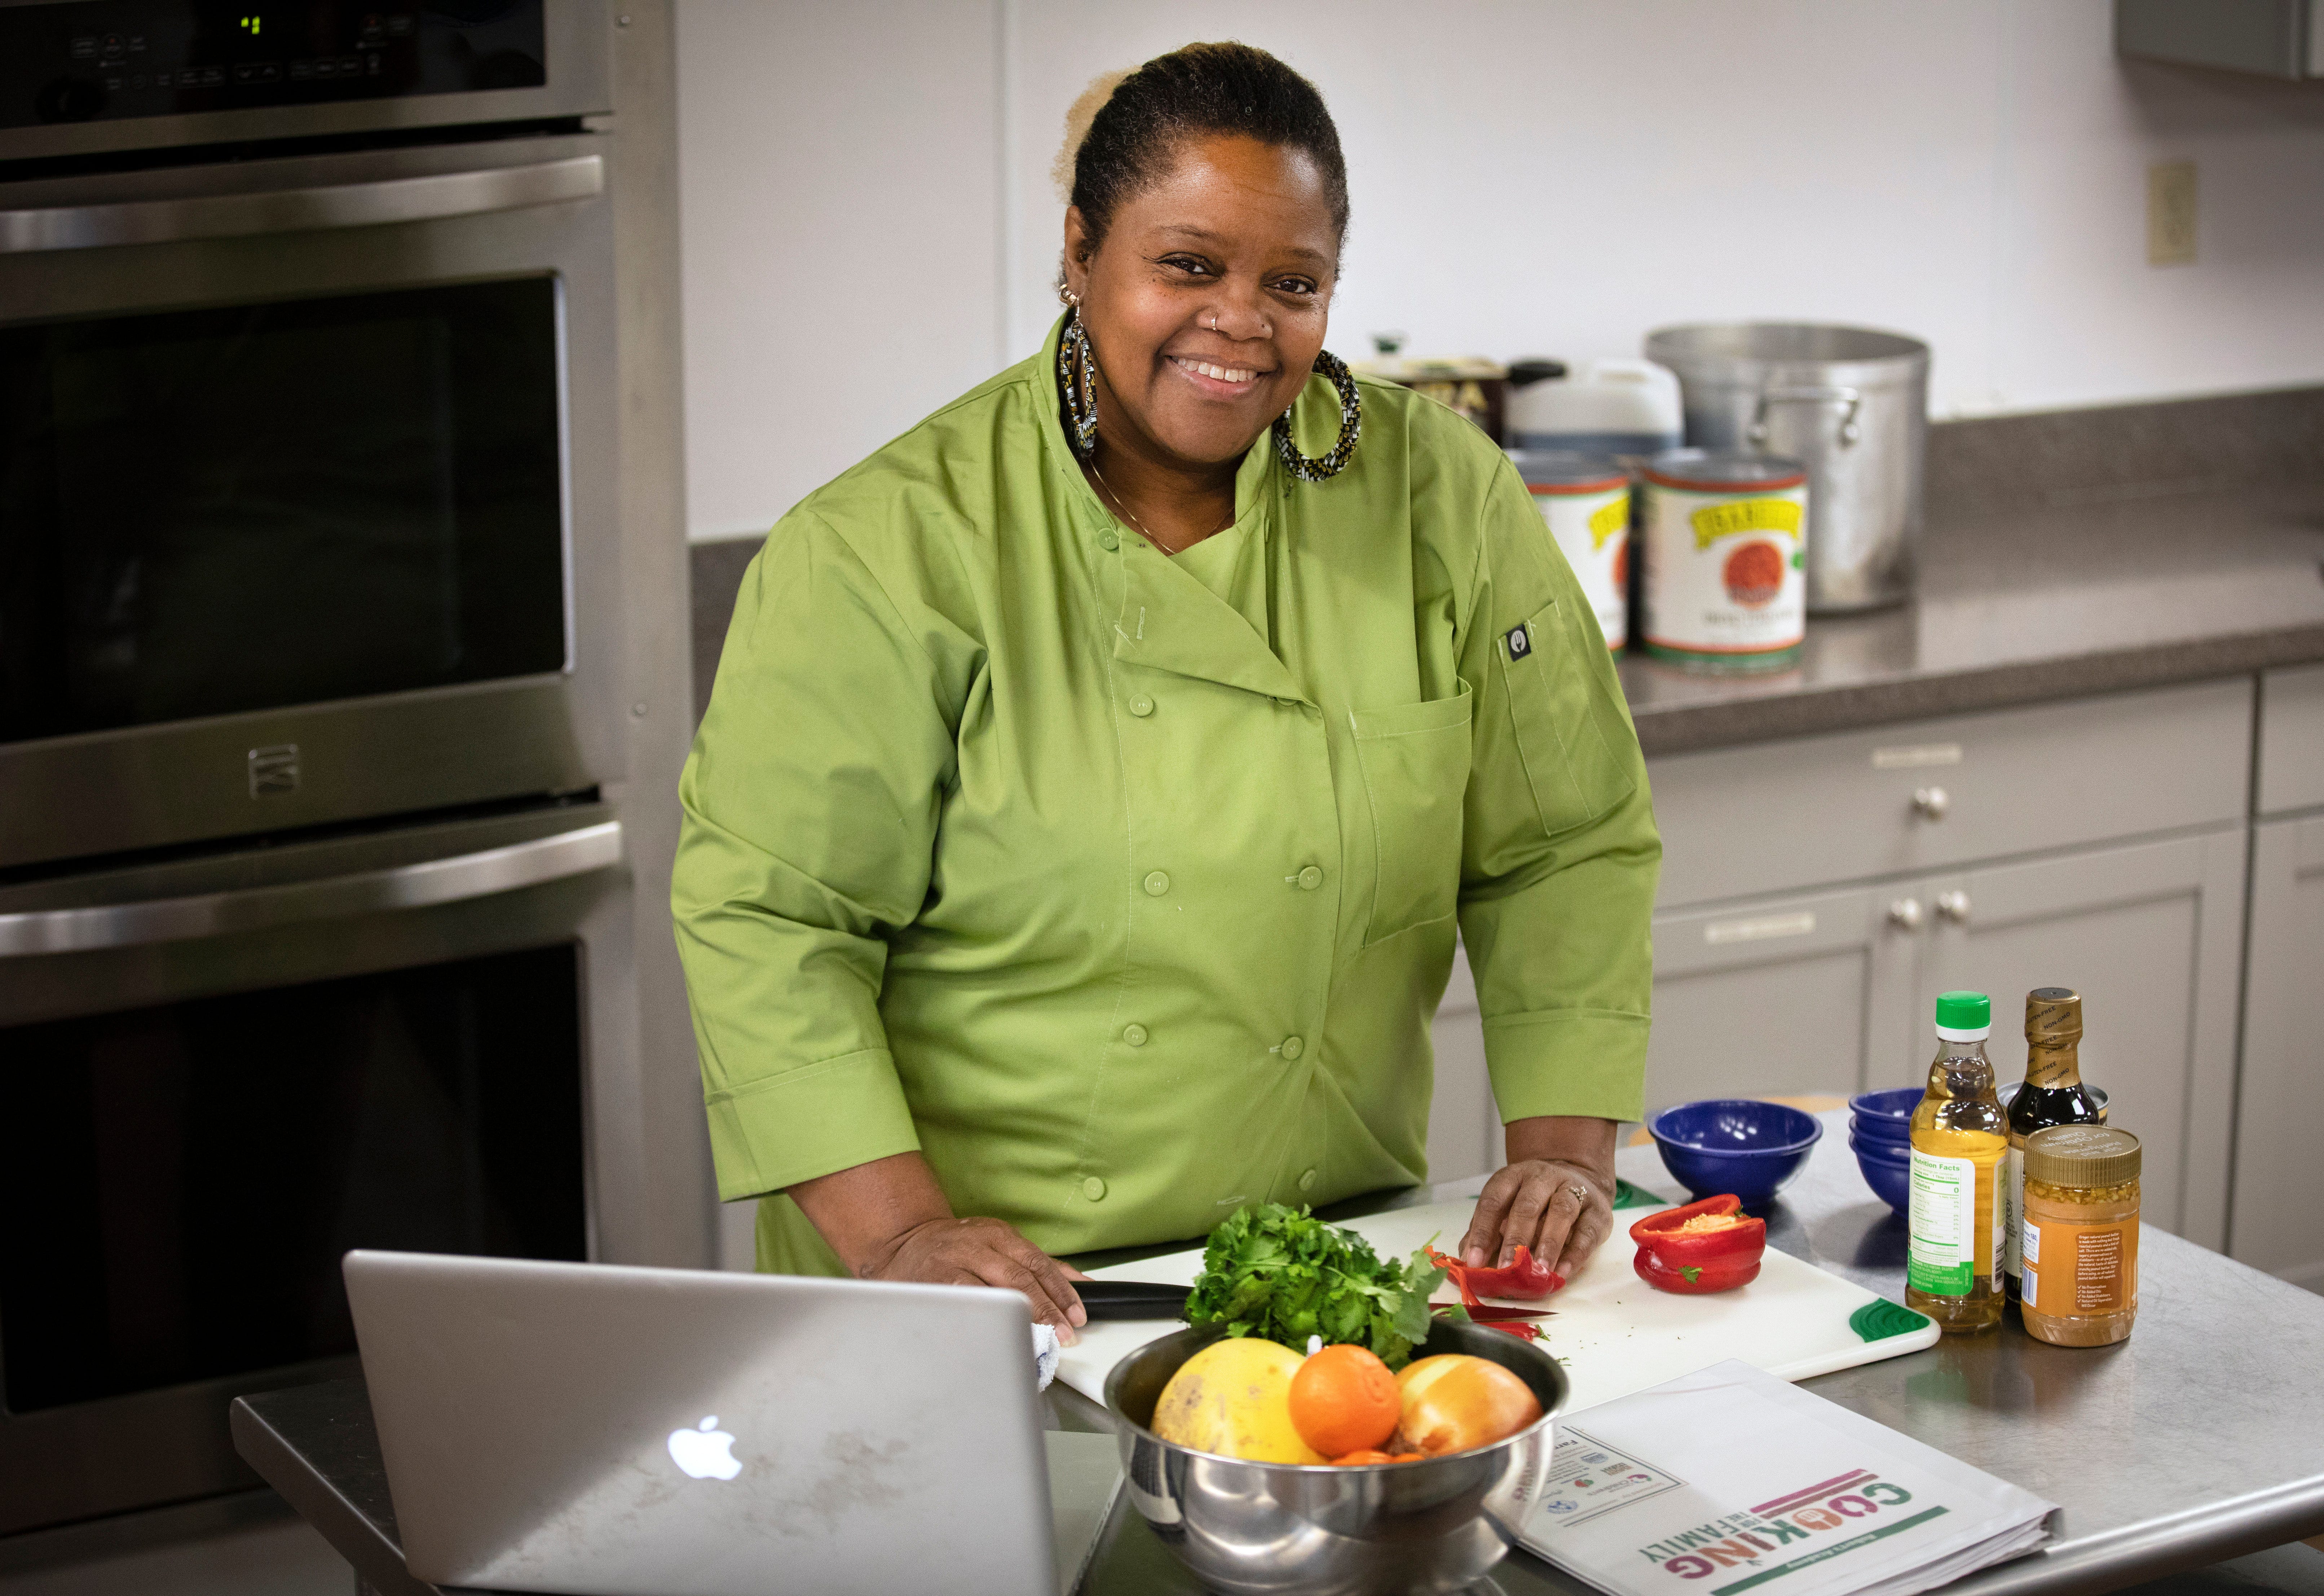 Mona Bronson is the chef charged with teaching families how to prepare a meal for under $10 at St. Anthony Center. She's currently creating a virtual class to begin this month. The five-week course will teach eight basic cooking skills. Participants will learn nutrition, knife skills, food safety and budget. Though the center has a full teaching kitchen, it's had to pivot to virtual classes due to the pandemic.